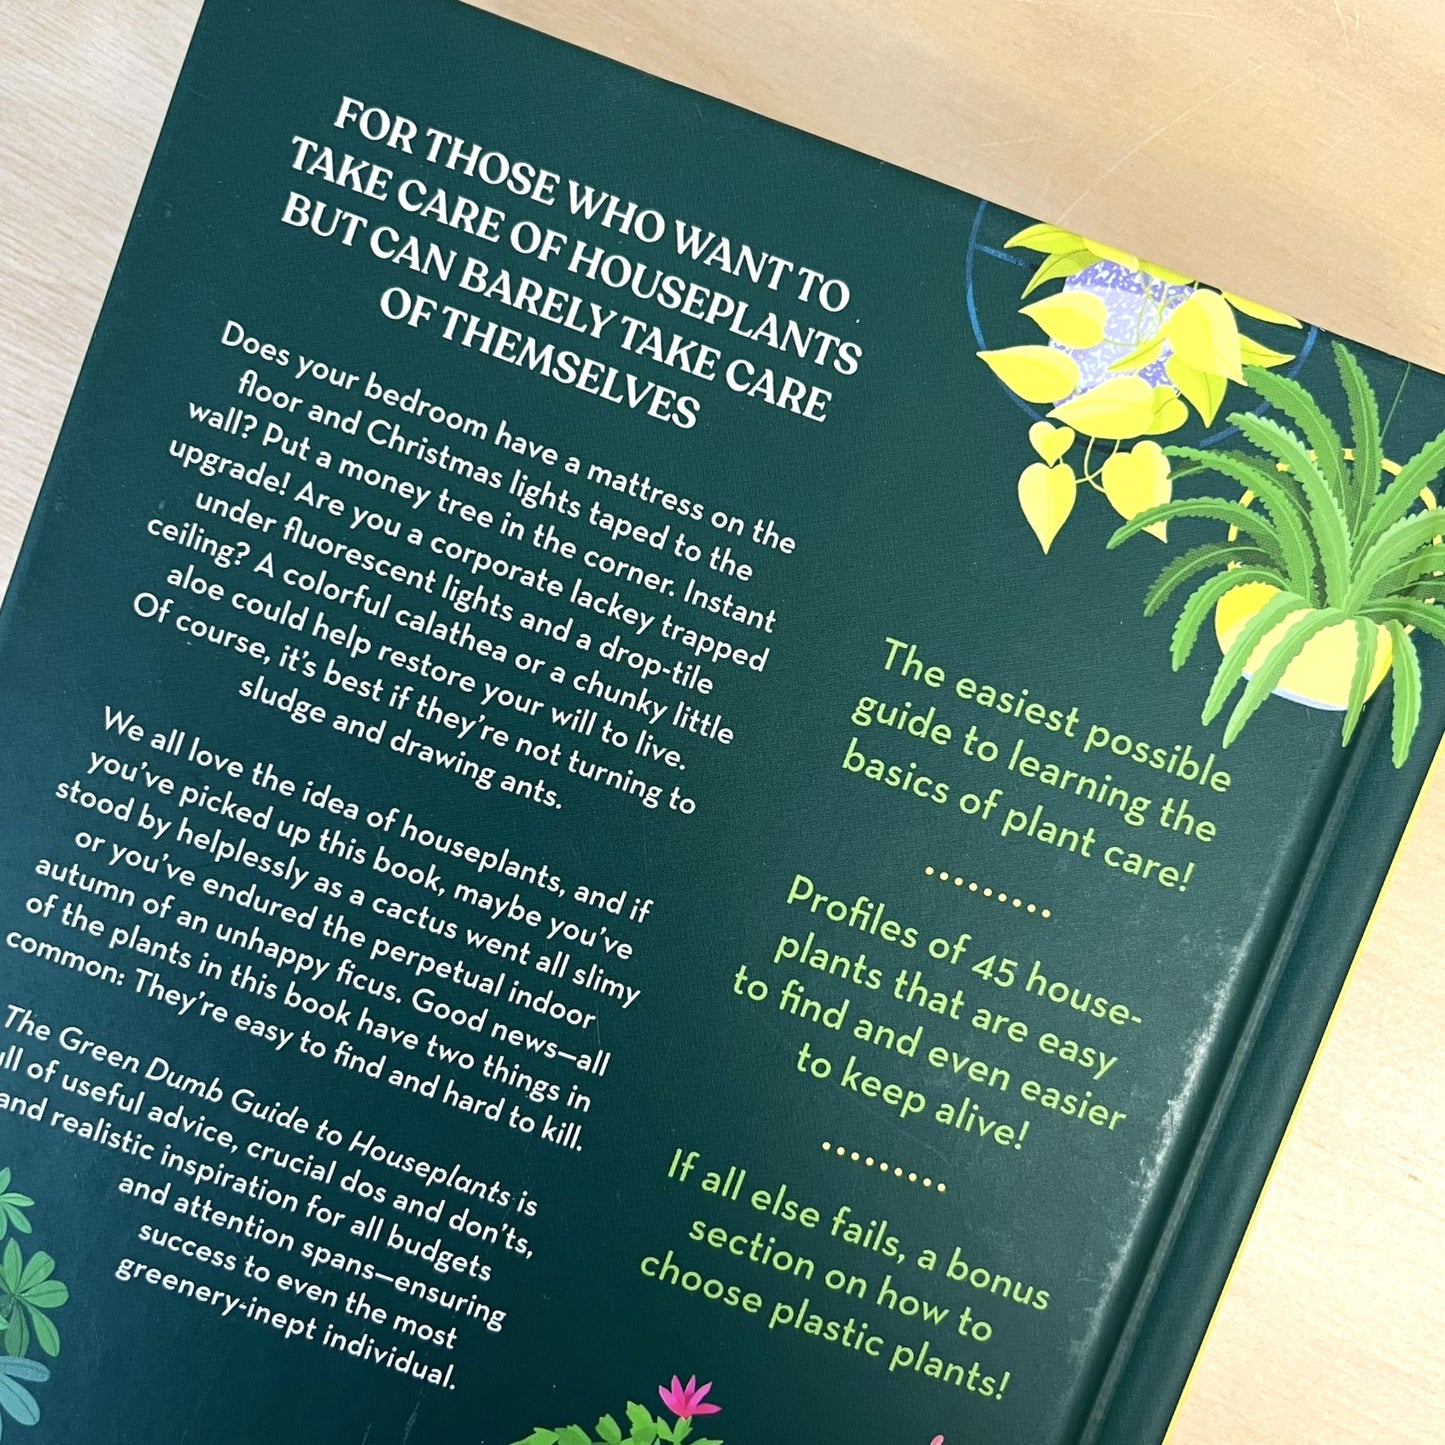 The Green Dumb Guide to Houseplants Book